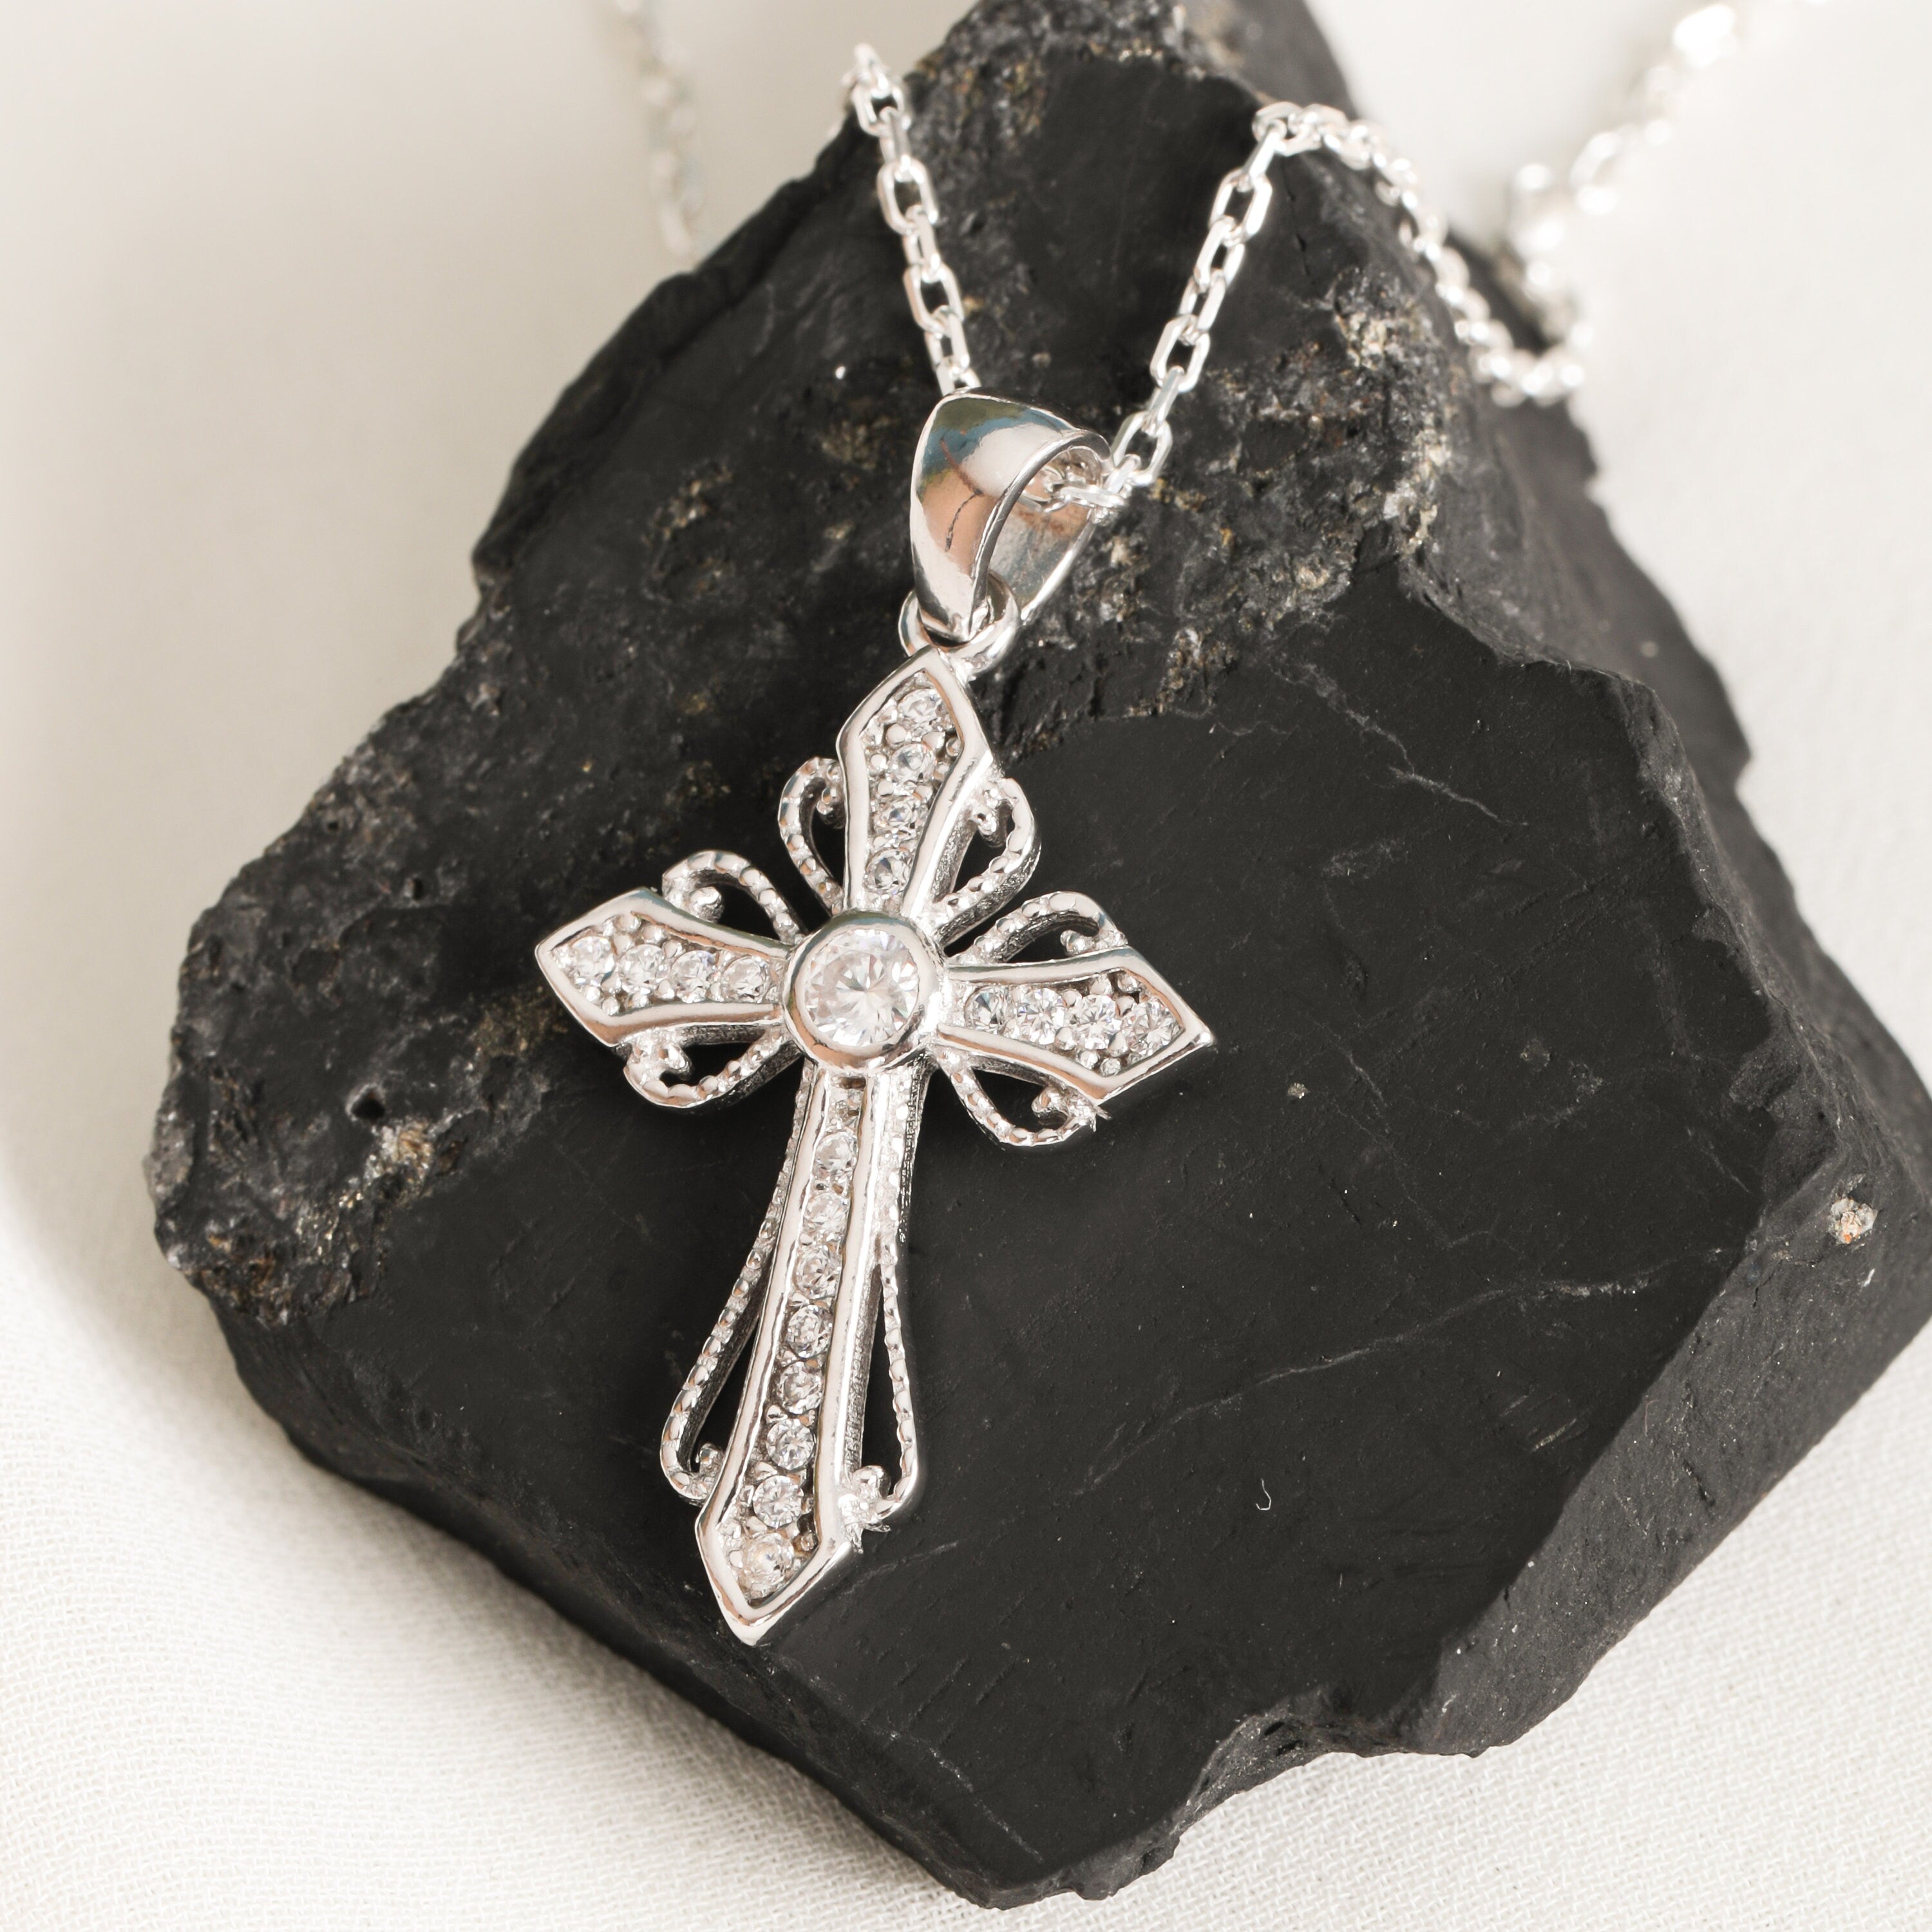 From the Heart, Two-Tone Layered Cross Necklace, 18 inches | Mardel |  4051918